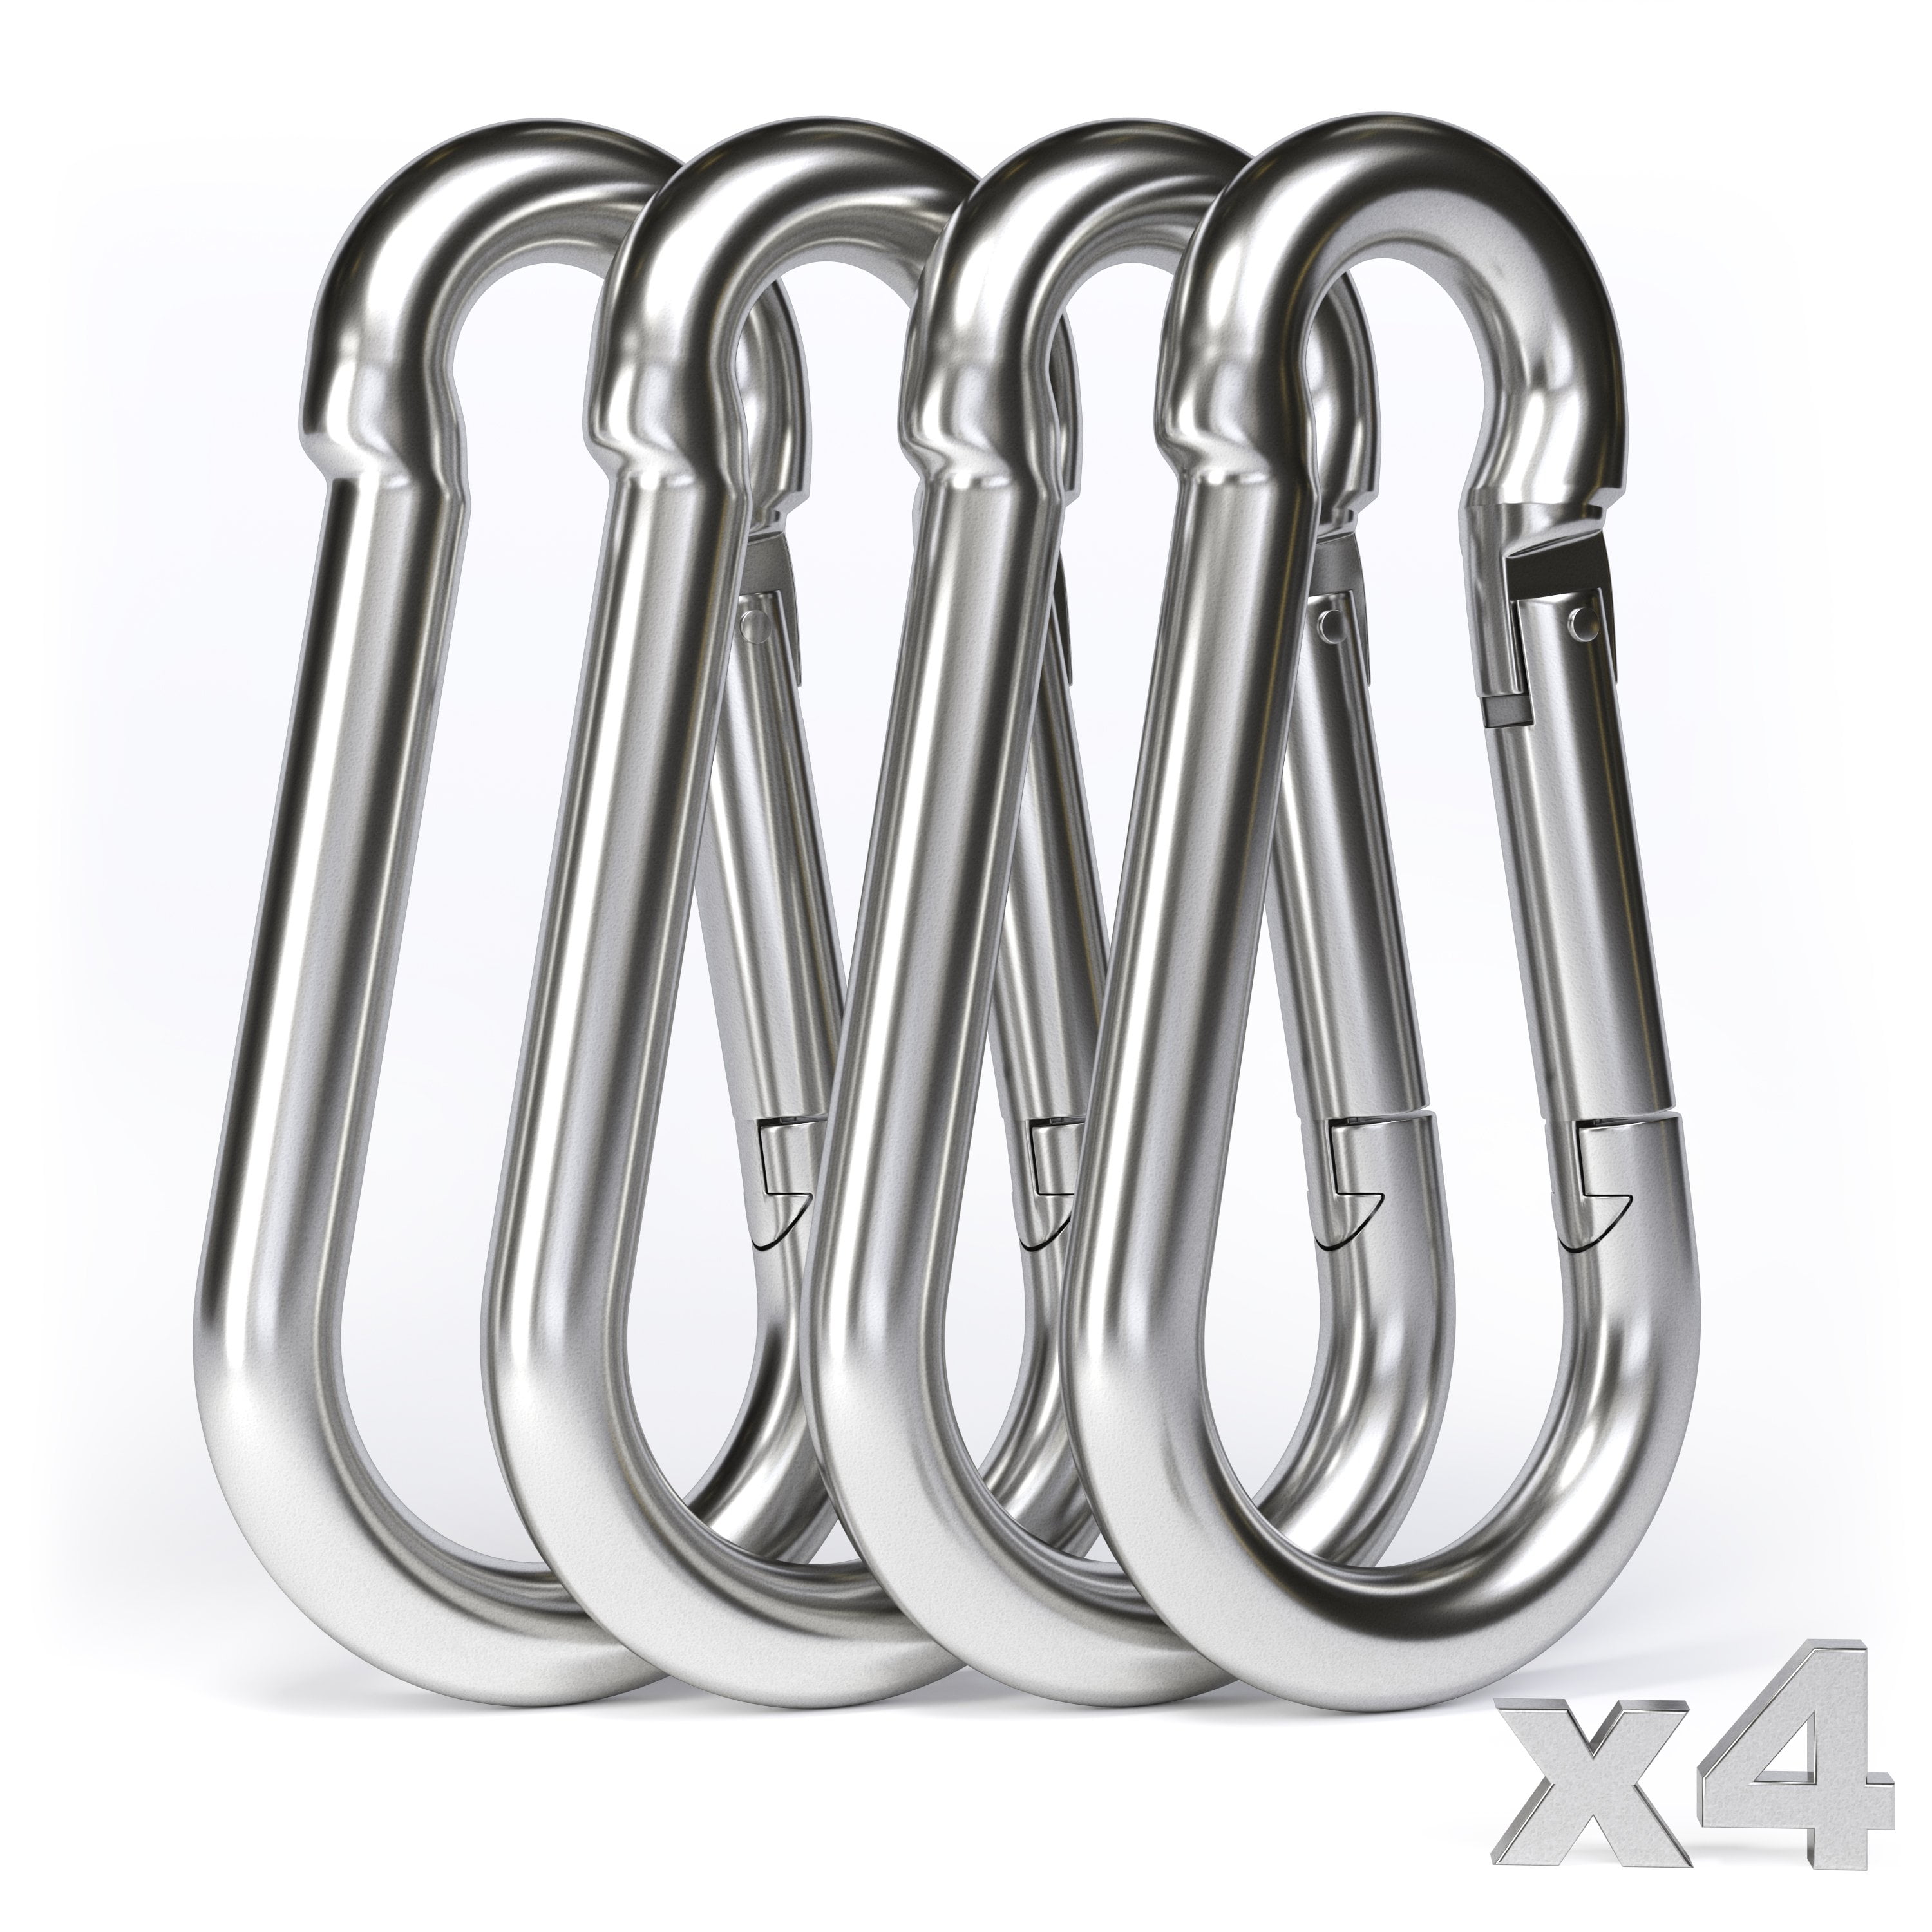 6 x Stainless Steel Spring Gate Snap Hook 2 Inch for Hiking and Camping Boating 